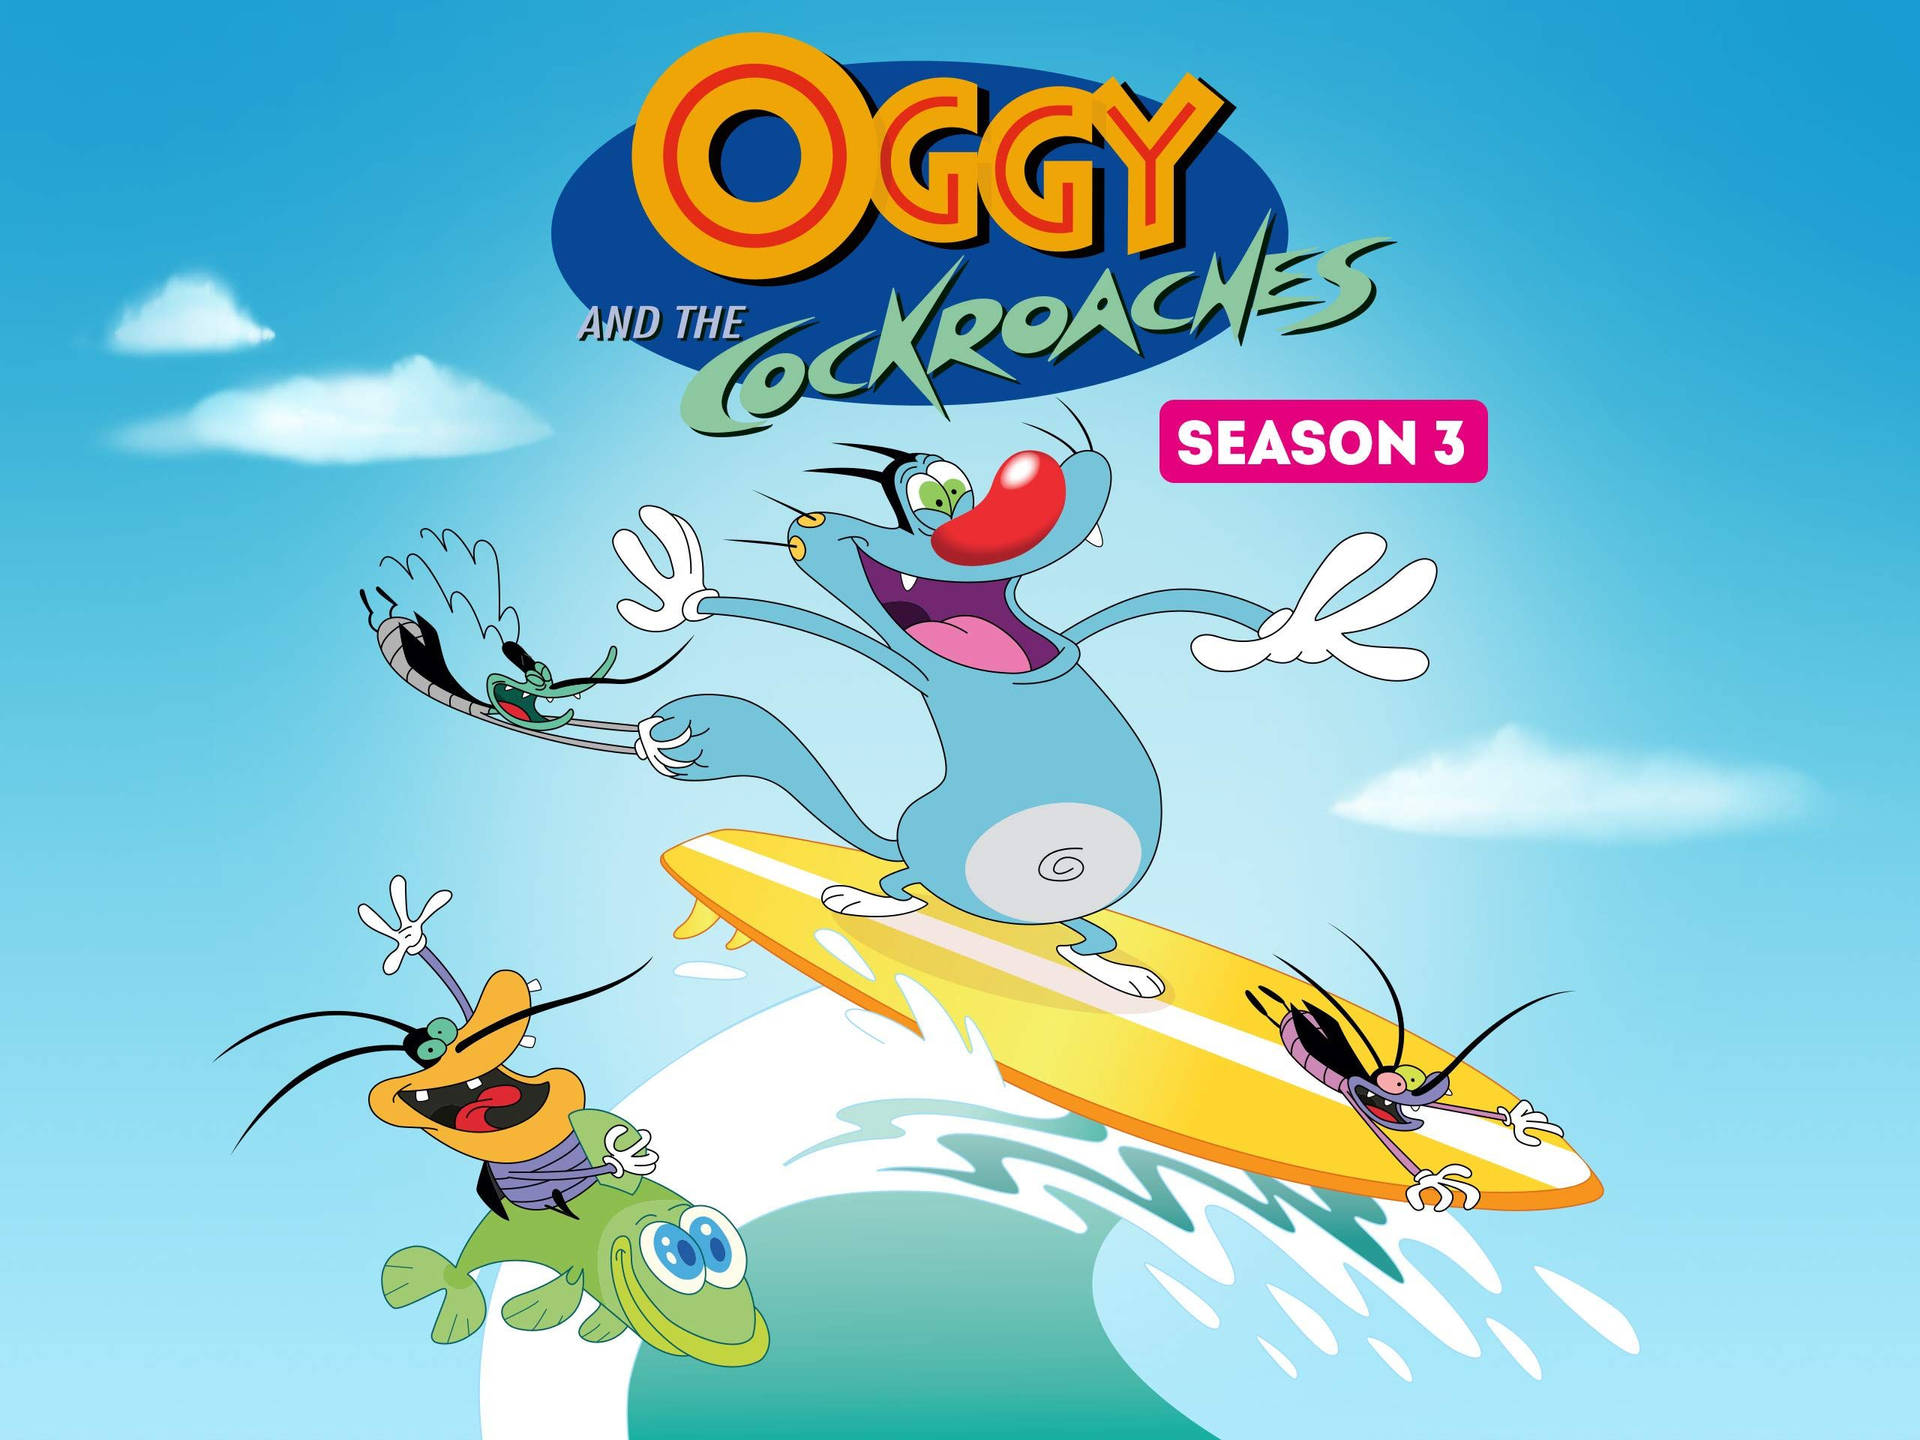 Oggy And The Cockroaches Season 3